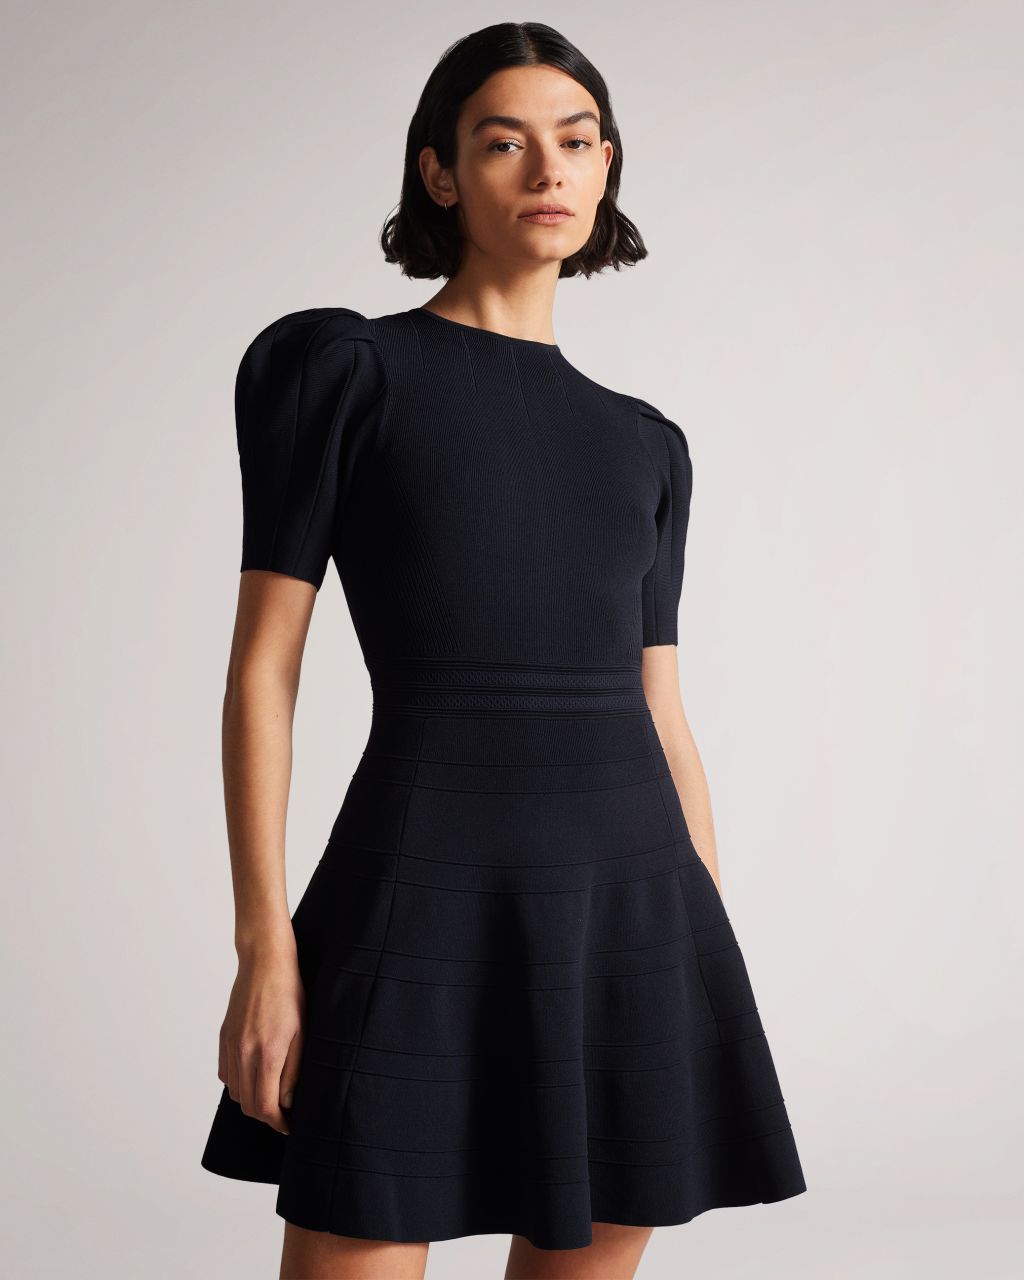 Ted Baker Women's Puff Sleeve Dress With Engineered Skirt in Midnight, Velvey